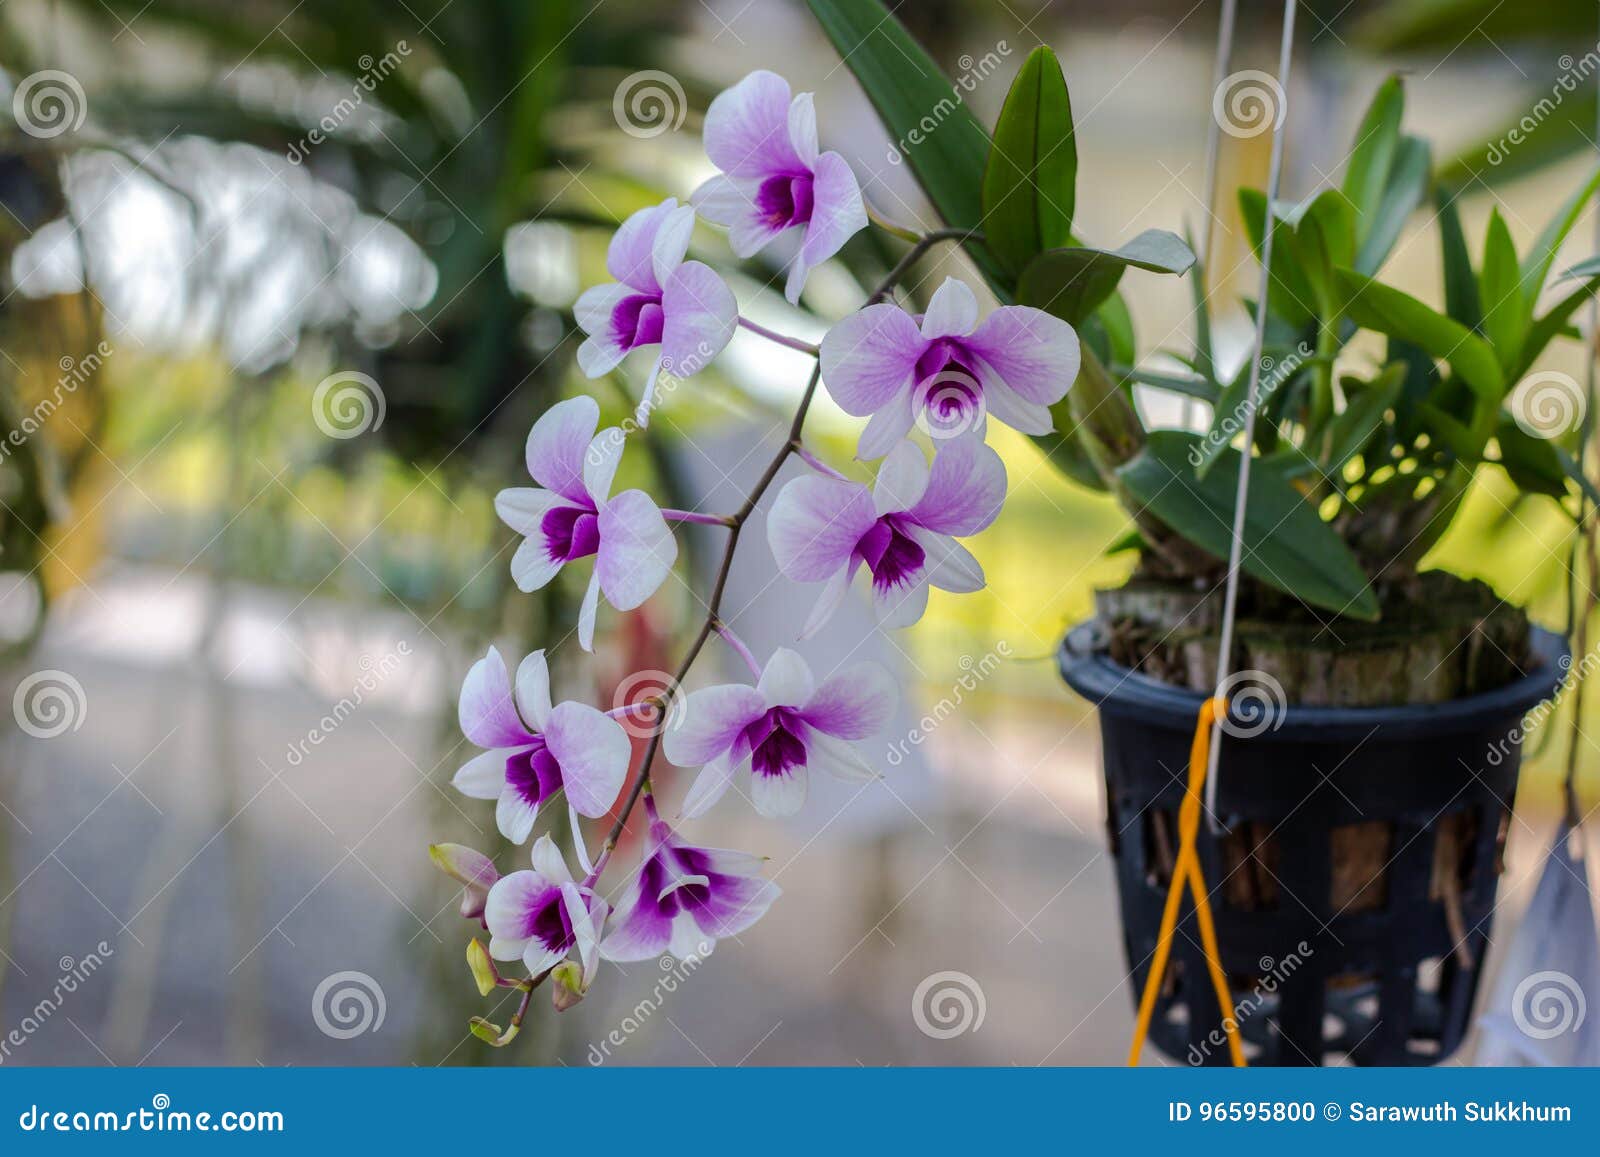 Orchidaceae , Orchid Flower in the Garden , Nature Background or Wallpaper  Stock Photo - Image of oriental, beauty: 96595800